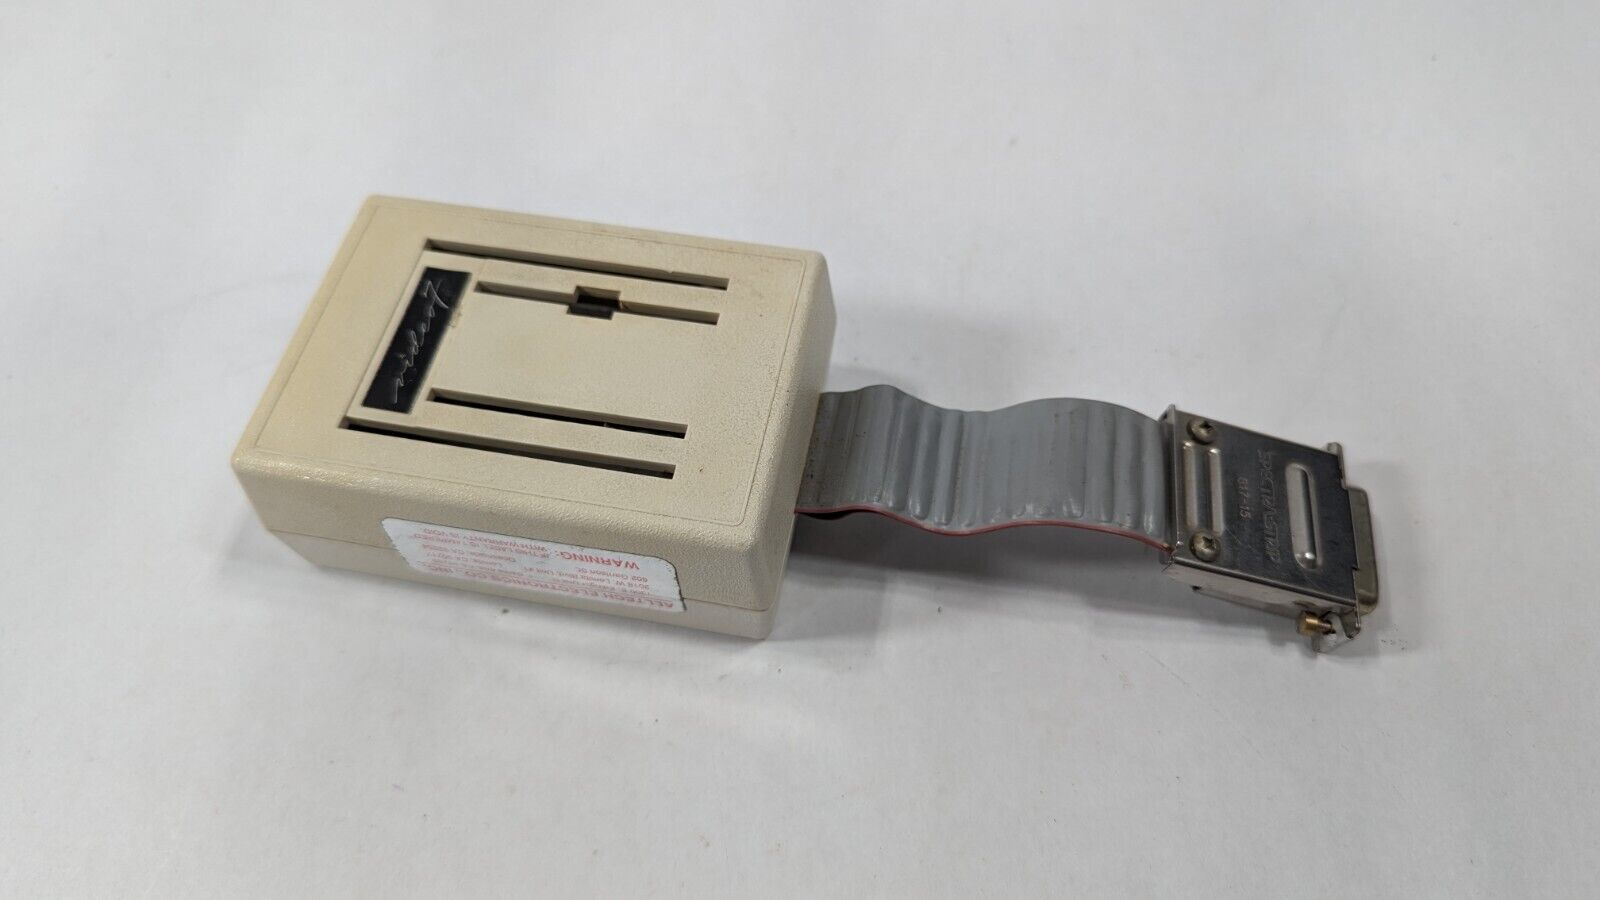 Video 7 RGB converter for Apple 2c IIc ][c - Analog RGB output - TESTED